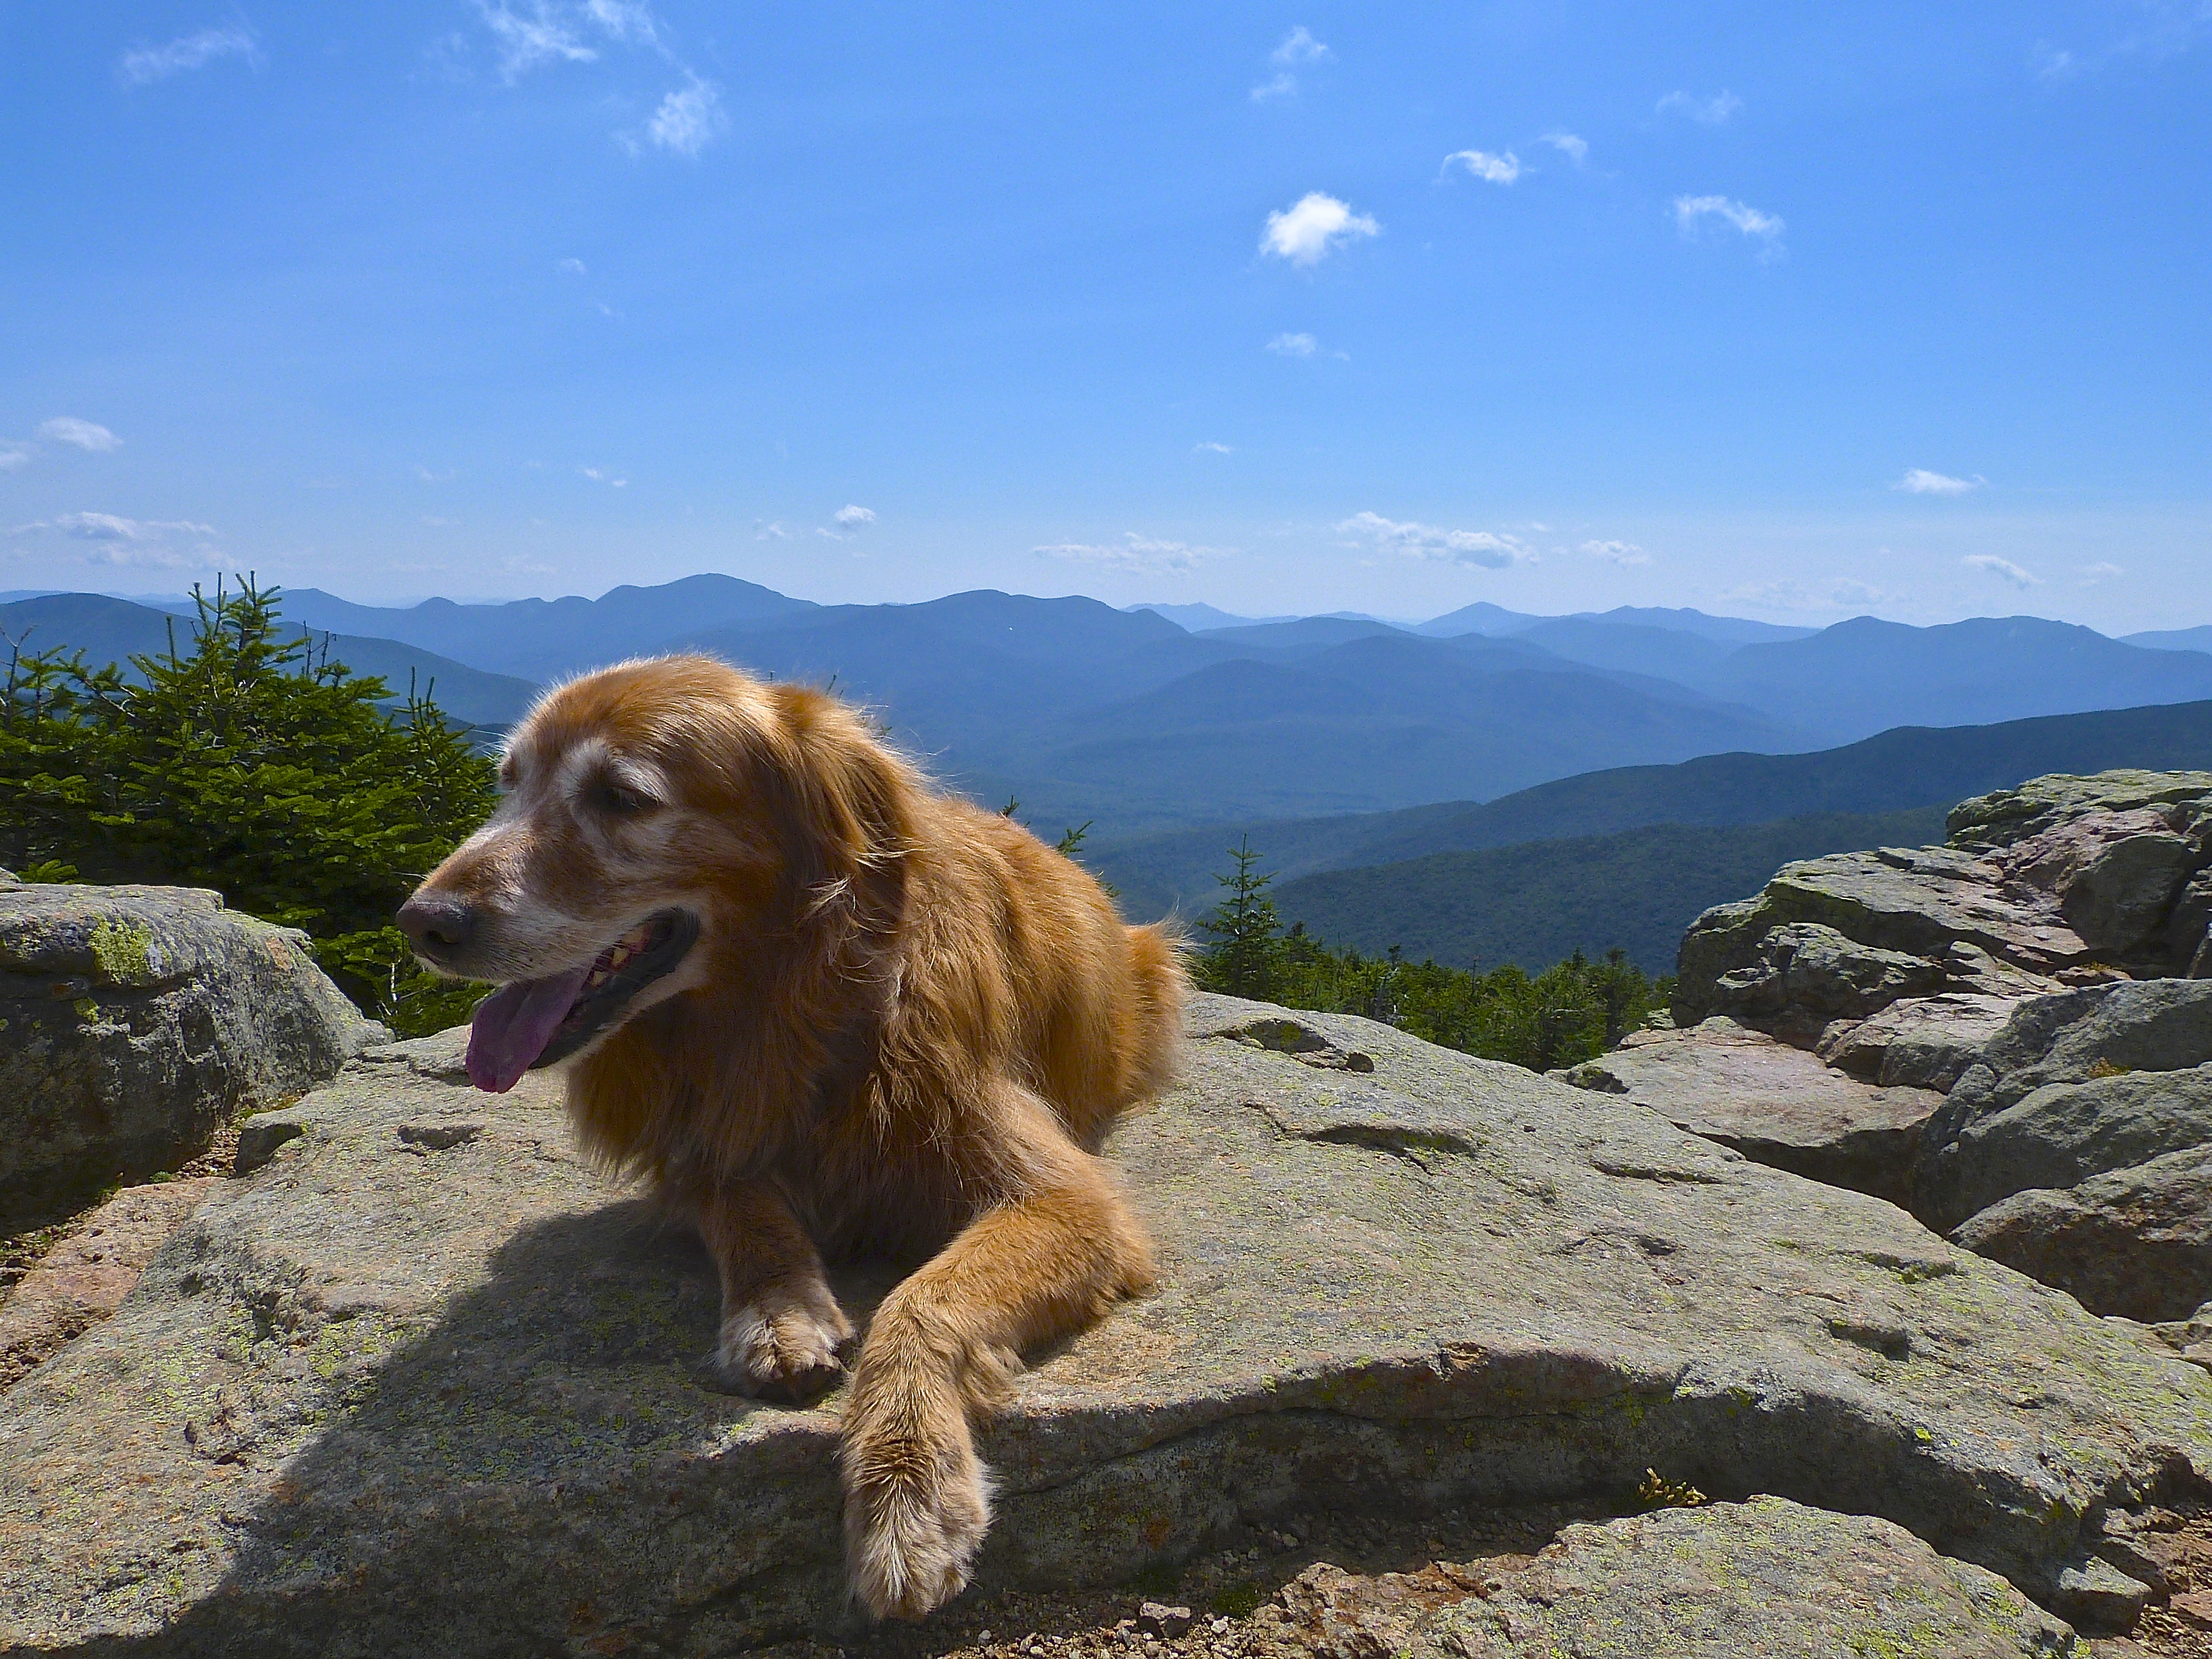 One of the summits on Franconia Ridge in New Hampshire.